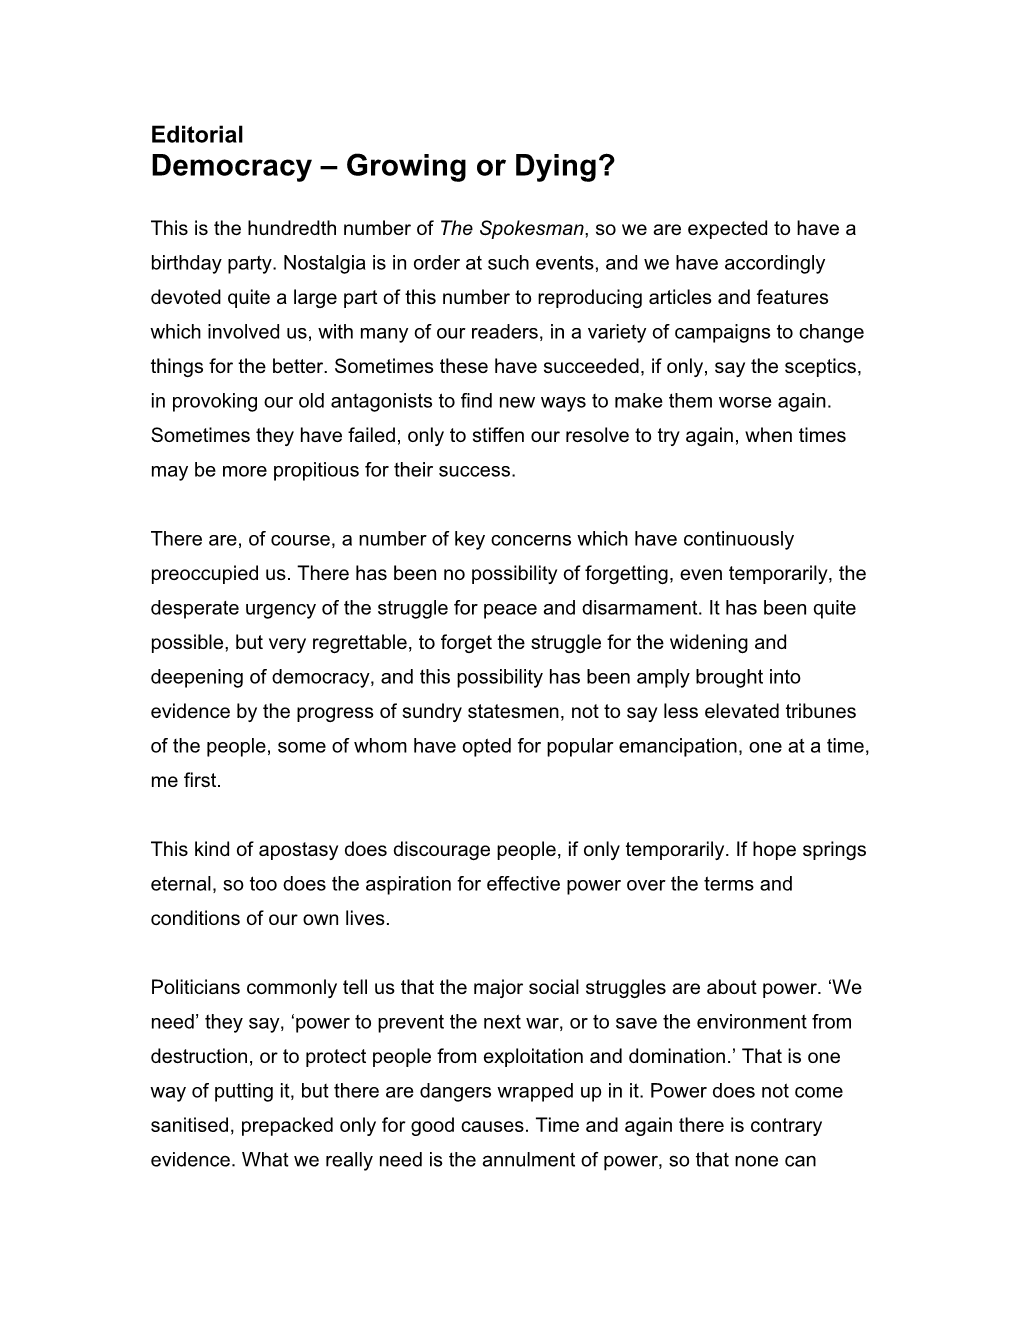 Democracy – Growing Or Dying?